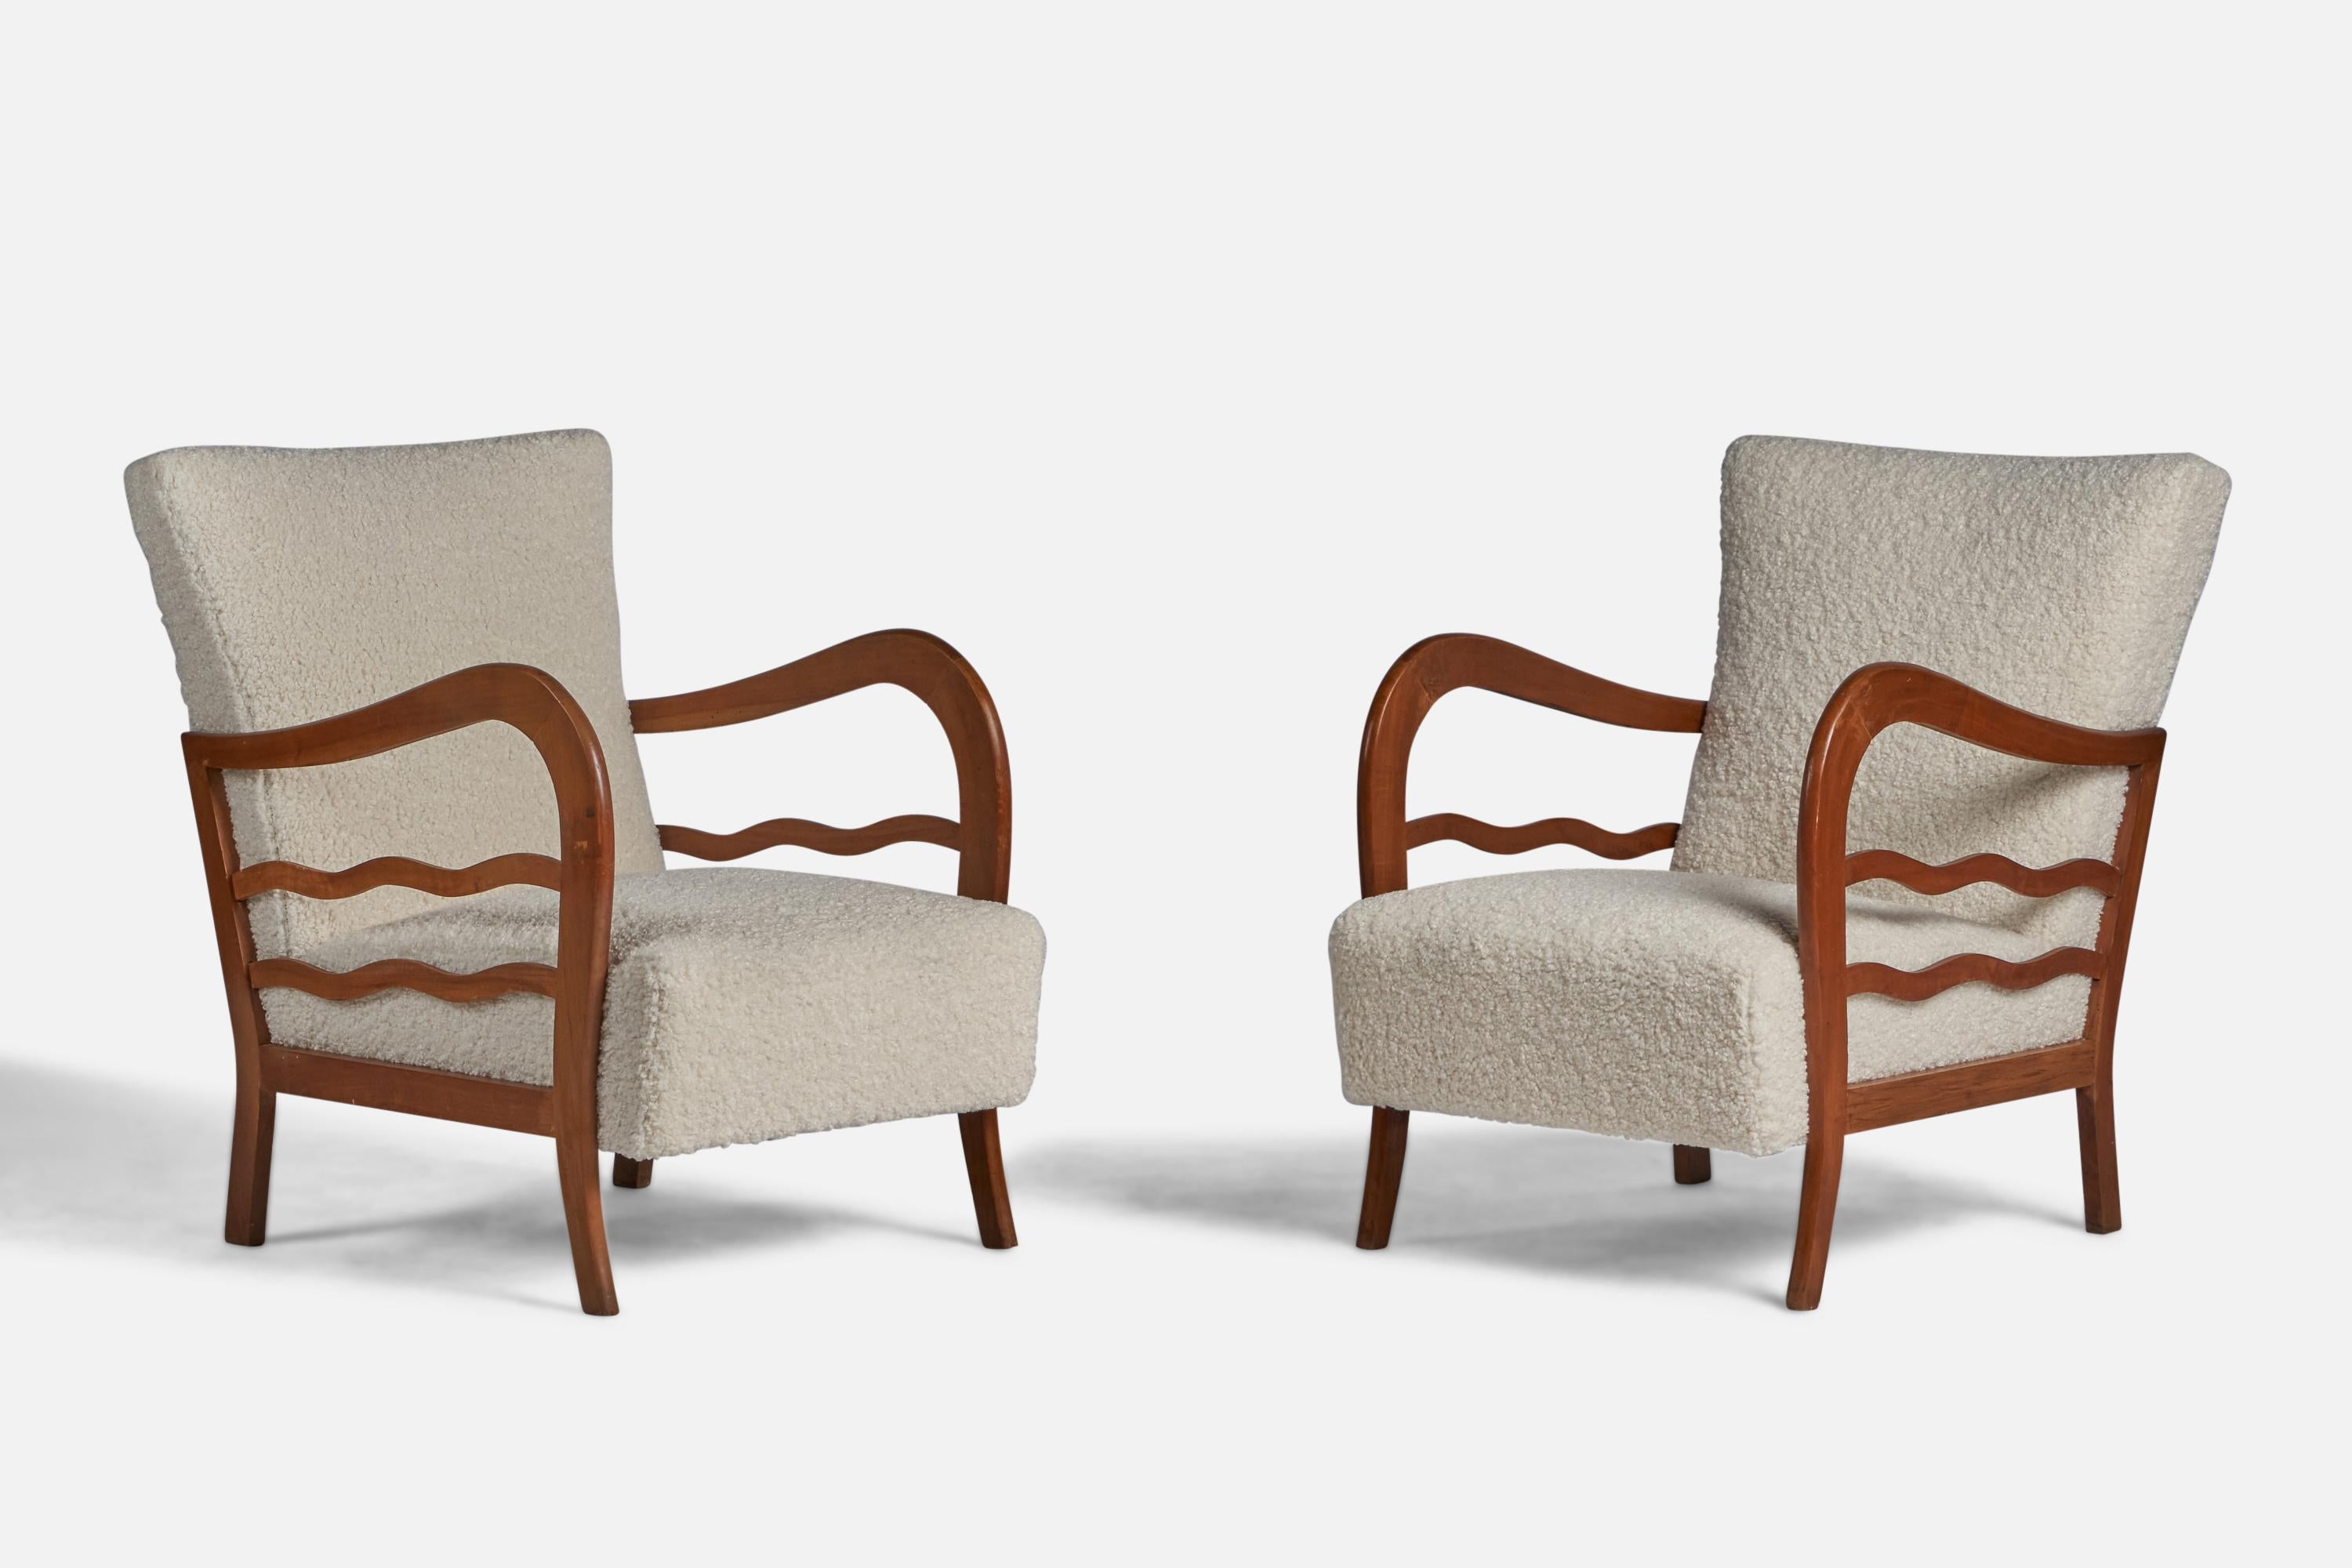 A pair of walnut and white bouclé fabric lounge chairs designed and produced in Italy, 1940s.
Fully restored including refinishing, addressing of wormholes, reupholstered in brand new fabric.